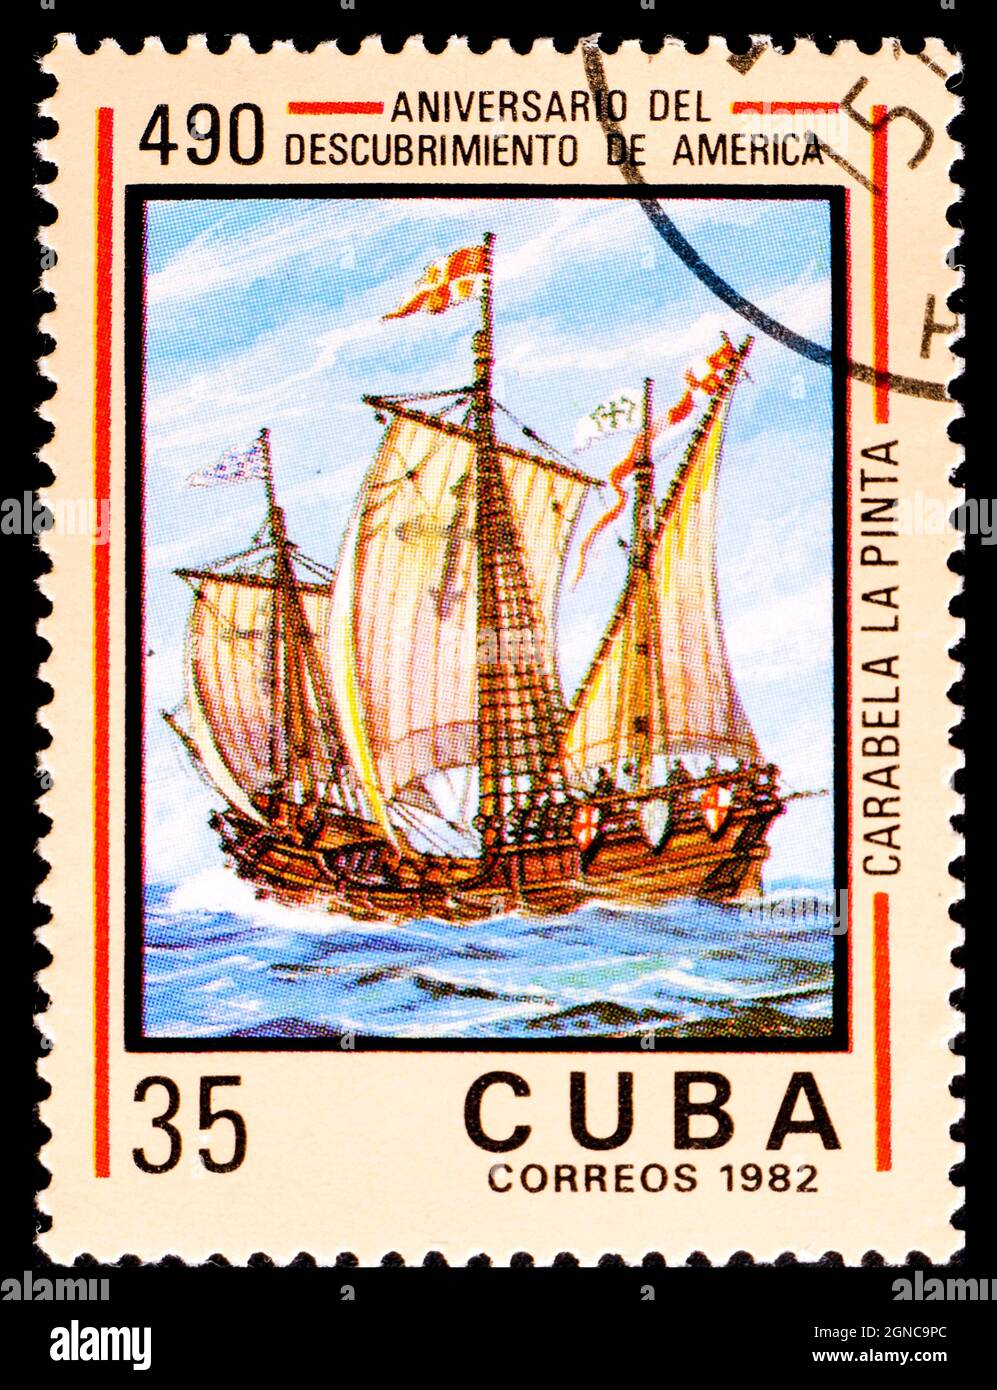 CUBA - CIRCA 1982: A Stamp printed in Cuba shows image caravel from series The Anniversary Discovery of America Stock Photo